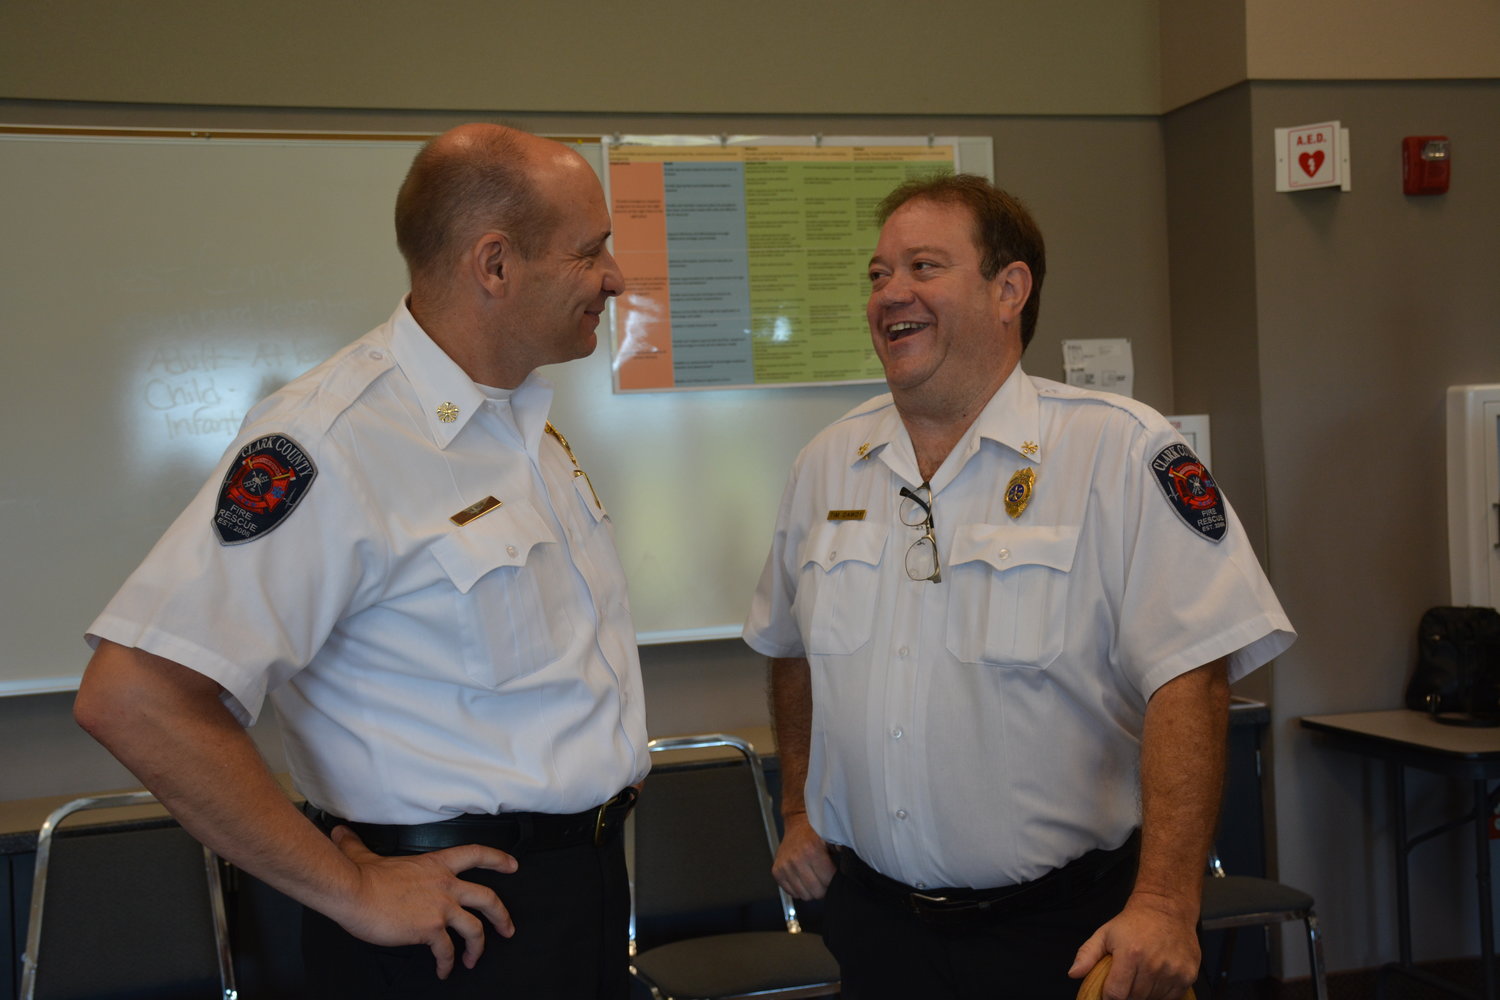 Fire division chief hangs up his helmet